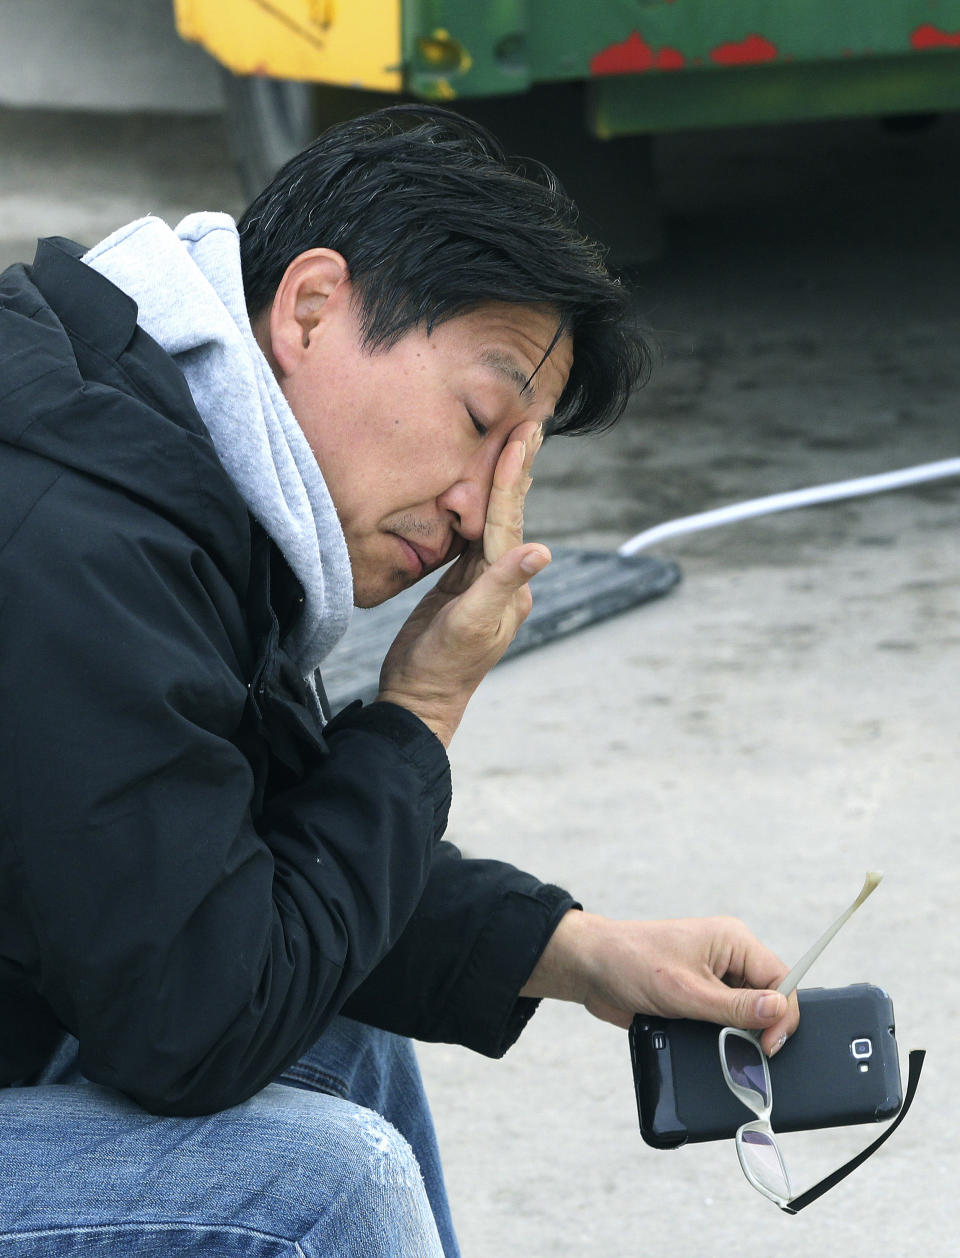 A relative of a passenger aboard the sunken Sewol ferry wipes his tears as he awaits news on his missing loved one at a port in Jindo, South Korea, Tuesday, April 22, 2014. As divers continue to search the interior of the sunken ferry, the number of confirmed deaths has risen, with over 200 other people still missing. (AP Photo/Ahn Young-joon)